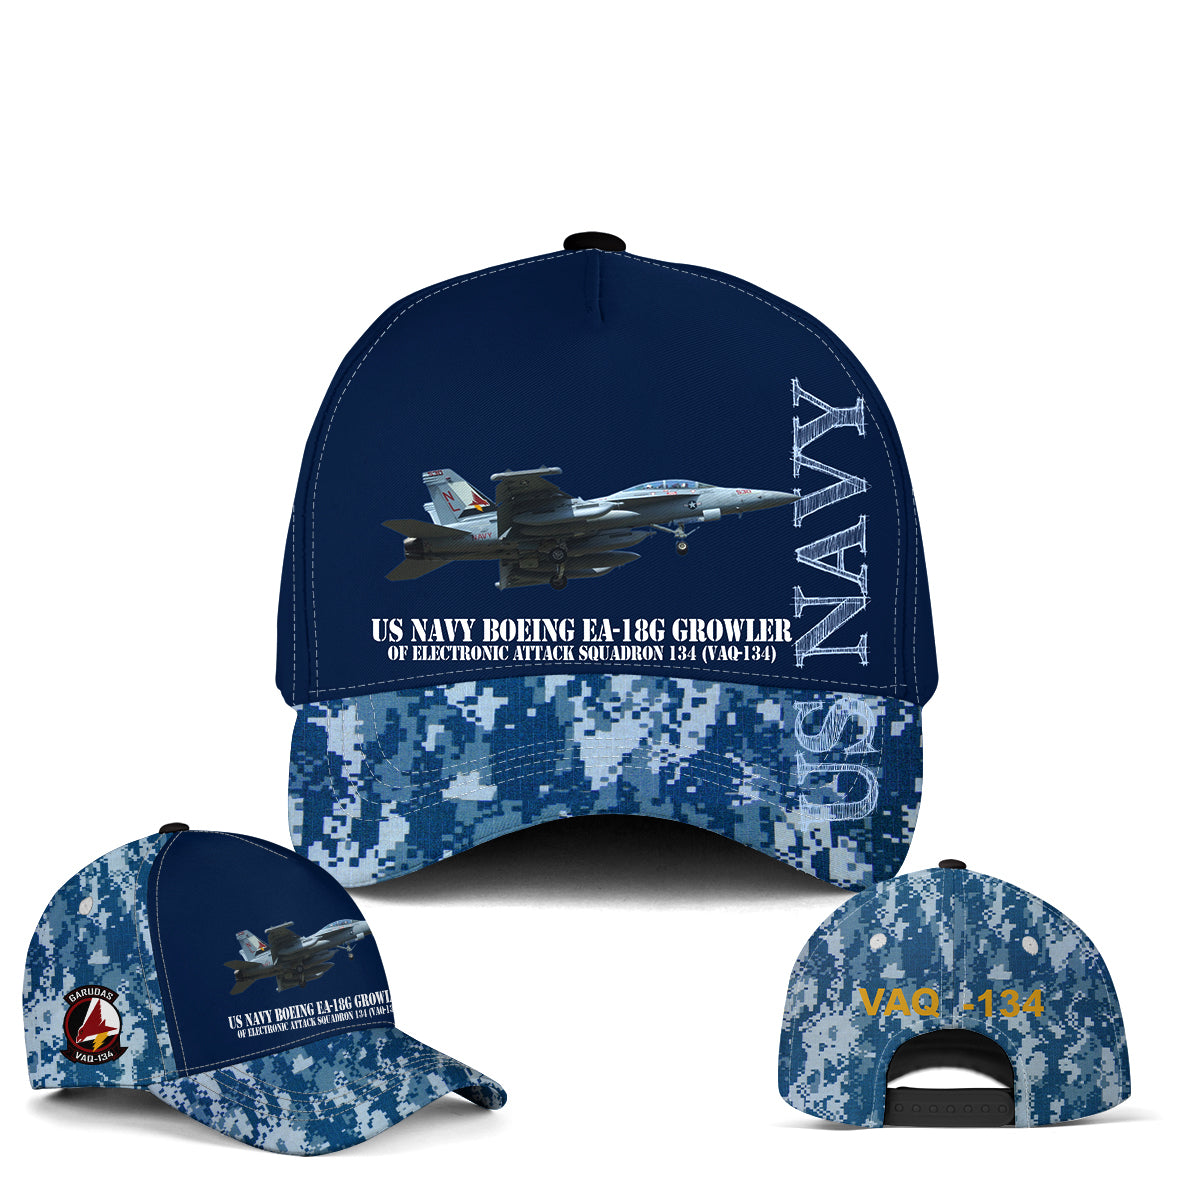 US Navy Boeing EA-18G Growler Of Electronic Attack Squadron 134 (VAQ-134) Baseball Cap